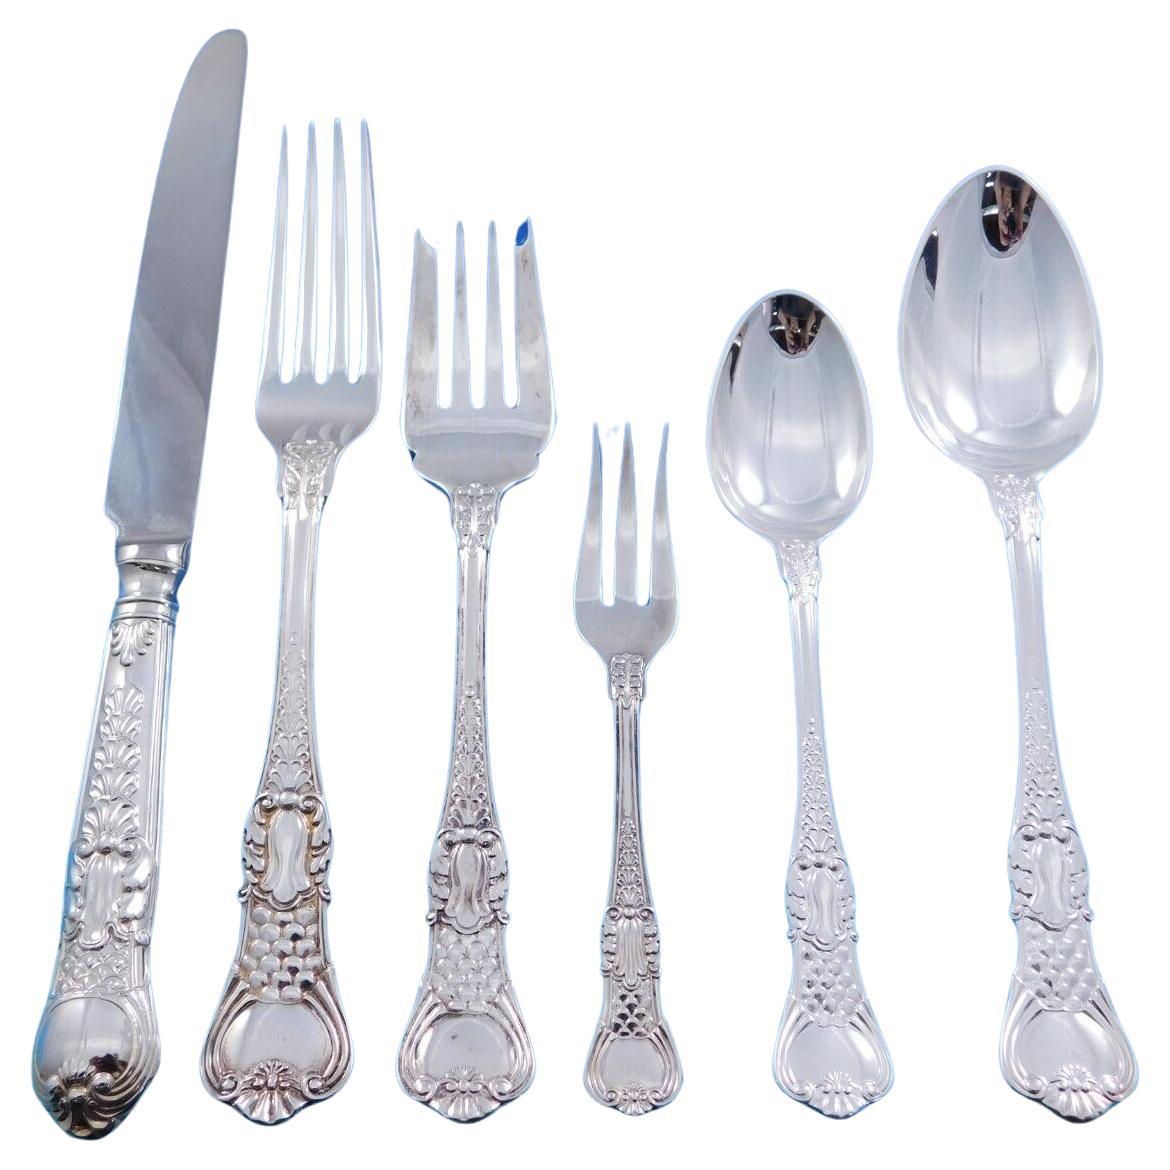 Coburg by Roberts & Belk English Silverplated Flatware Set Service 56 pc Dinner For Sale